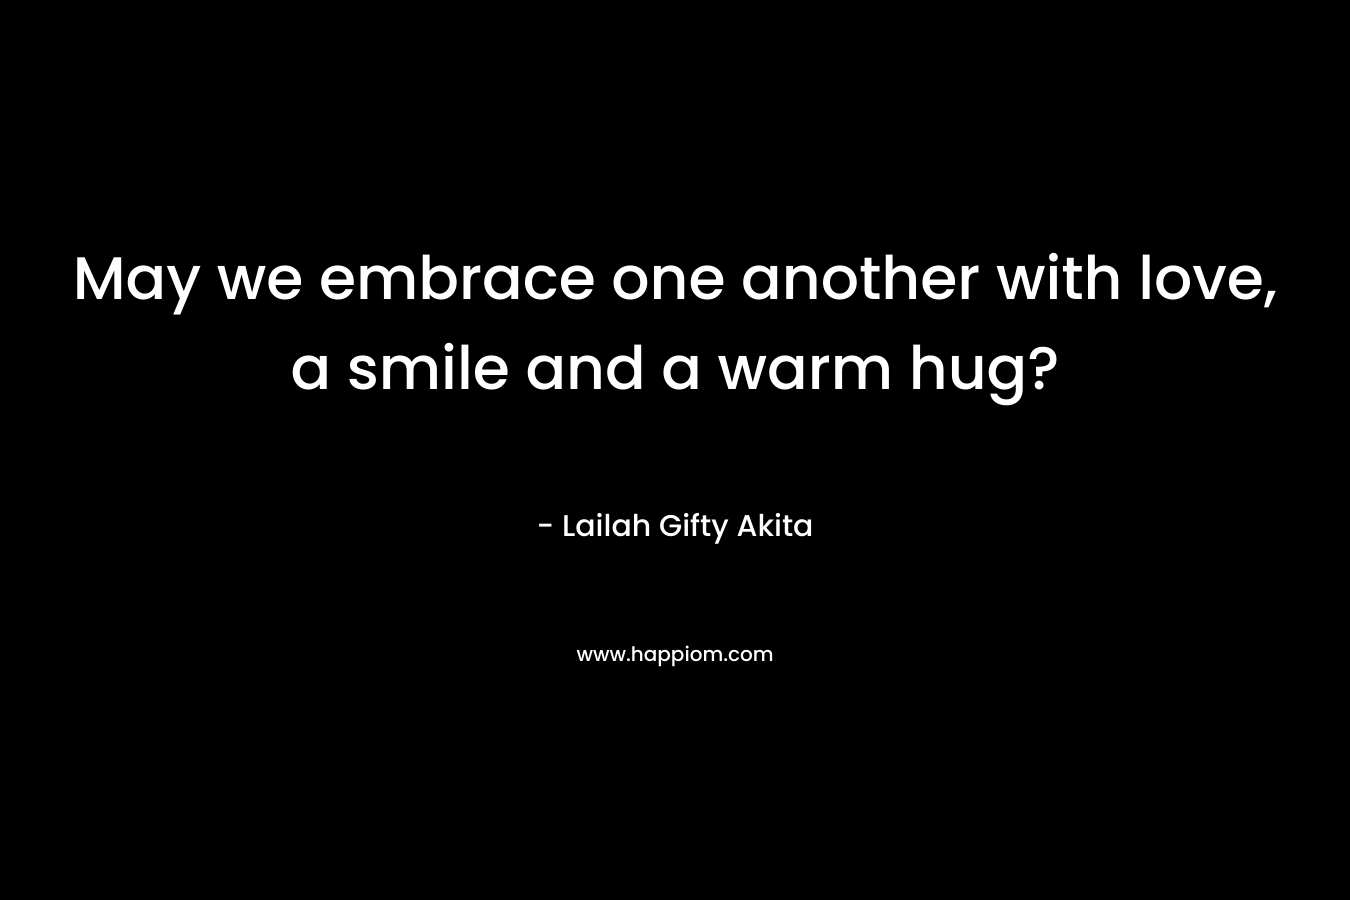 May we embrace one another with love, a smile and a warm hug? – Lailah Gifty Akita